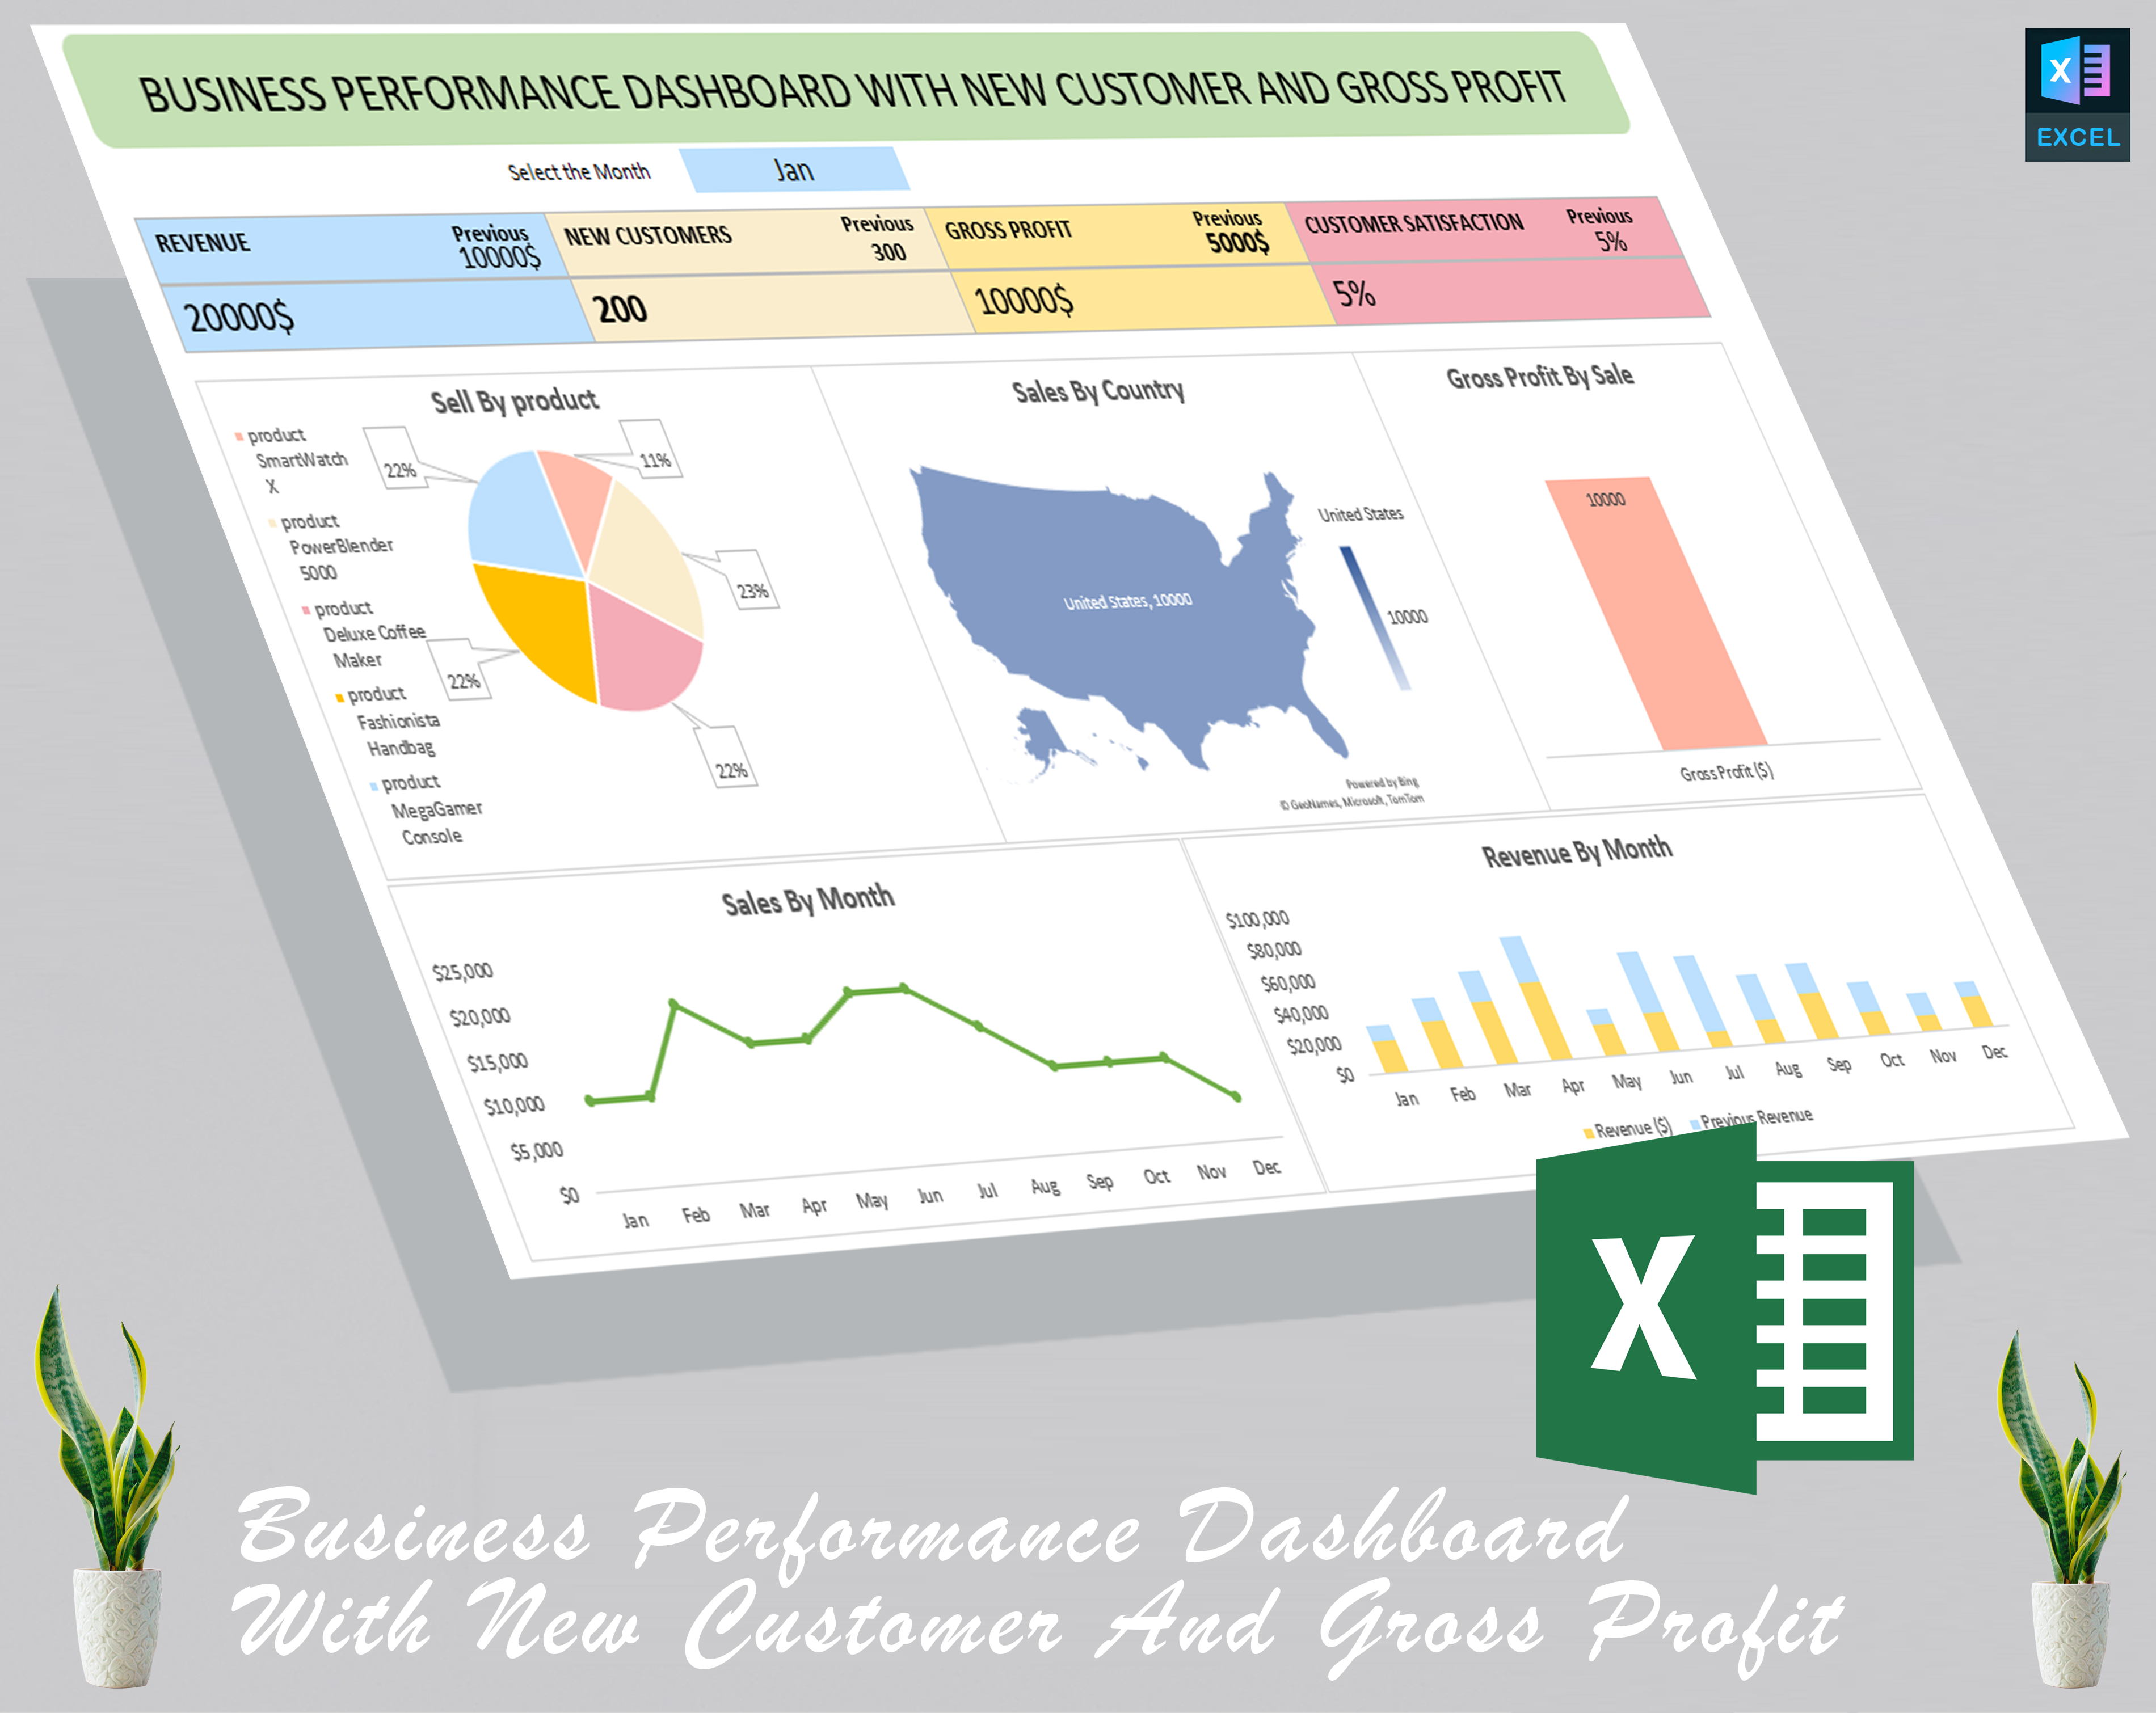 Business performance dashboard with new customers and gross profit